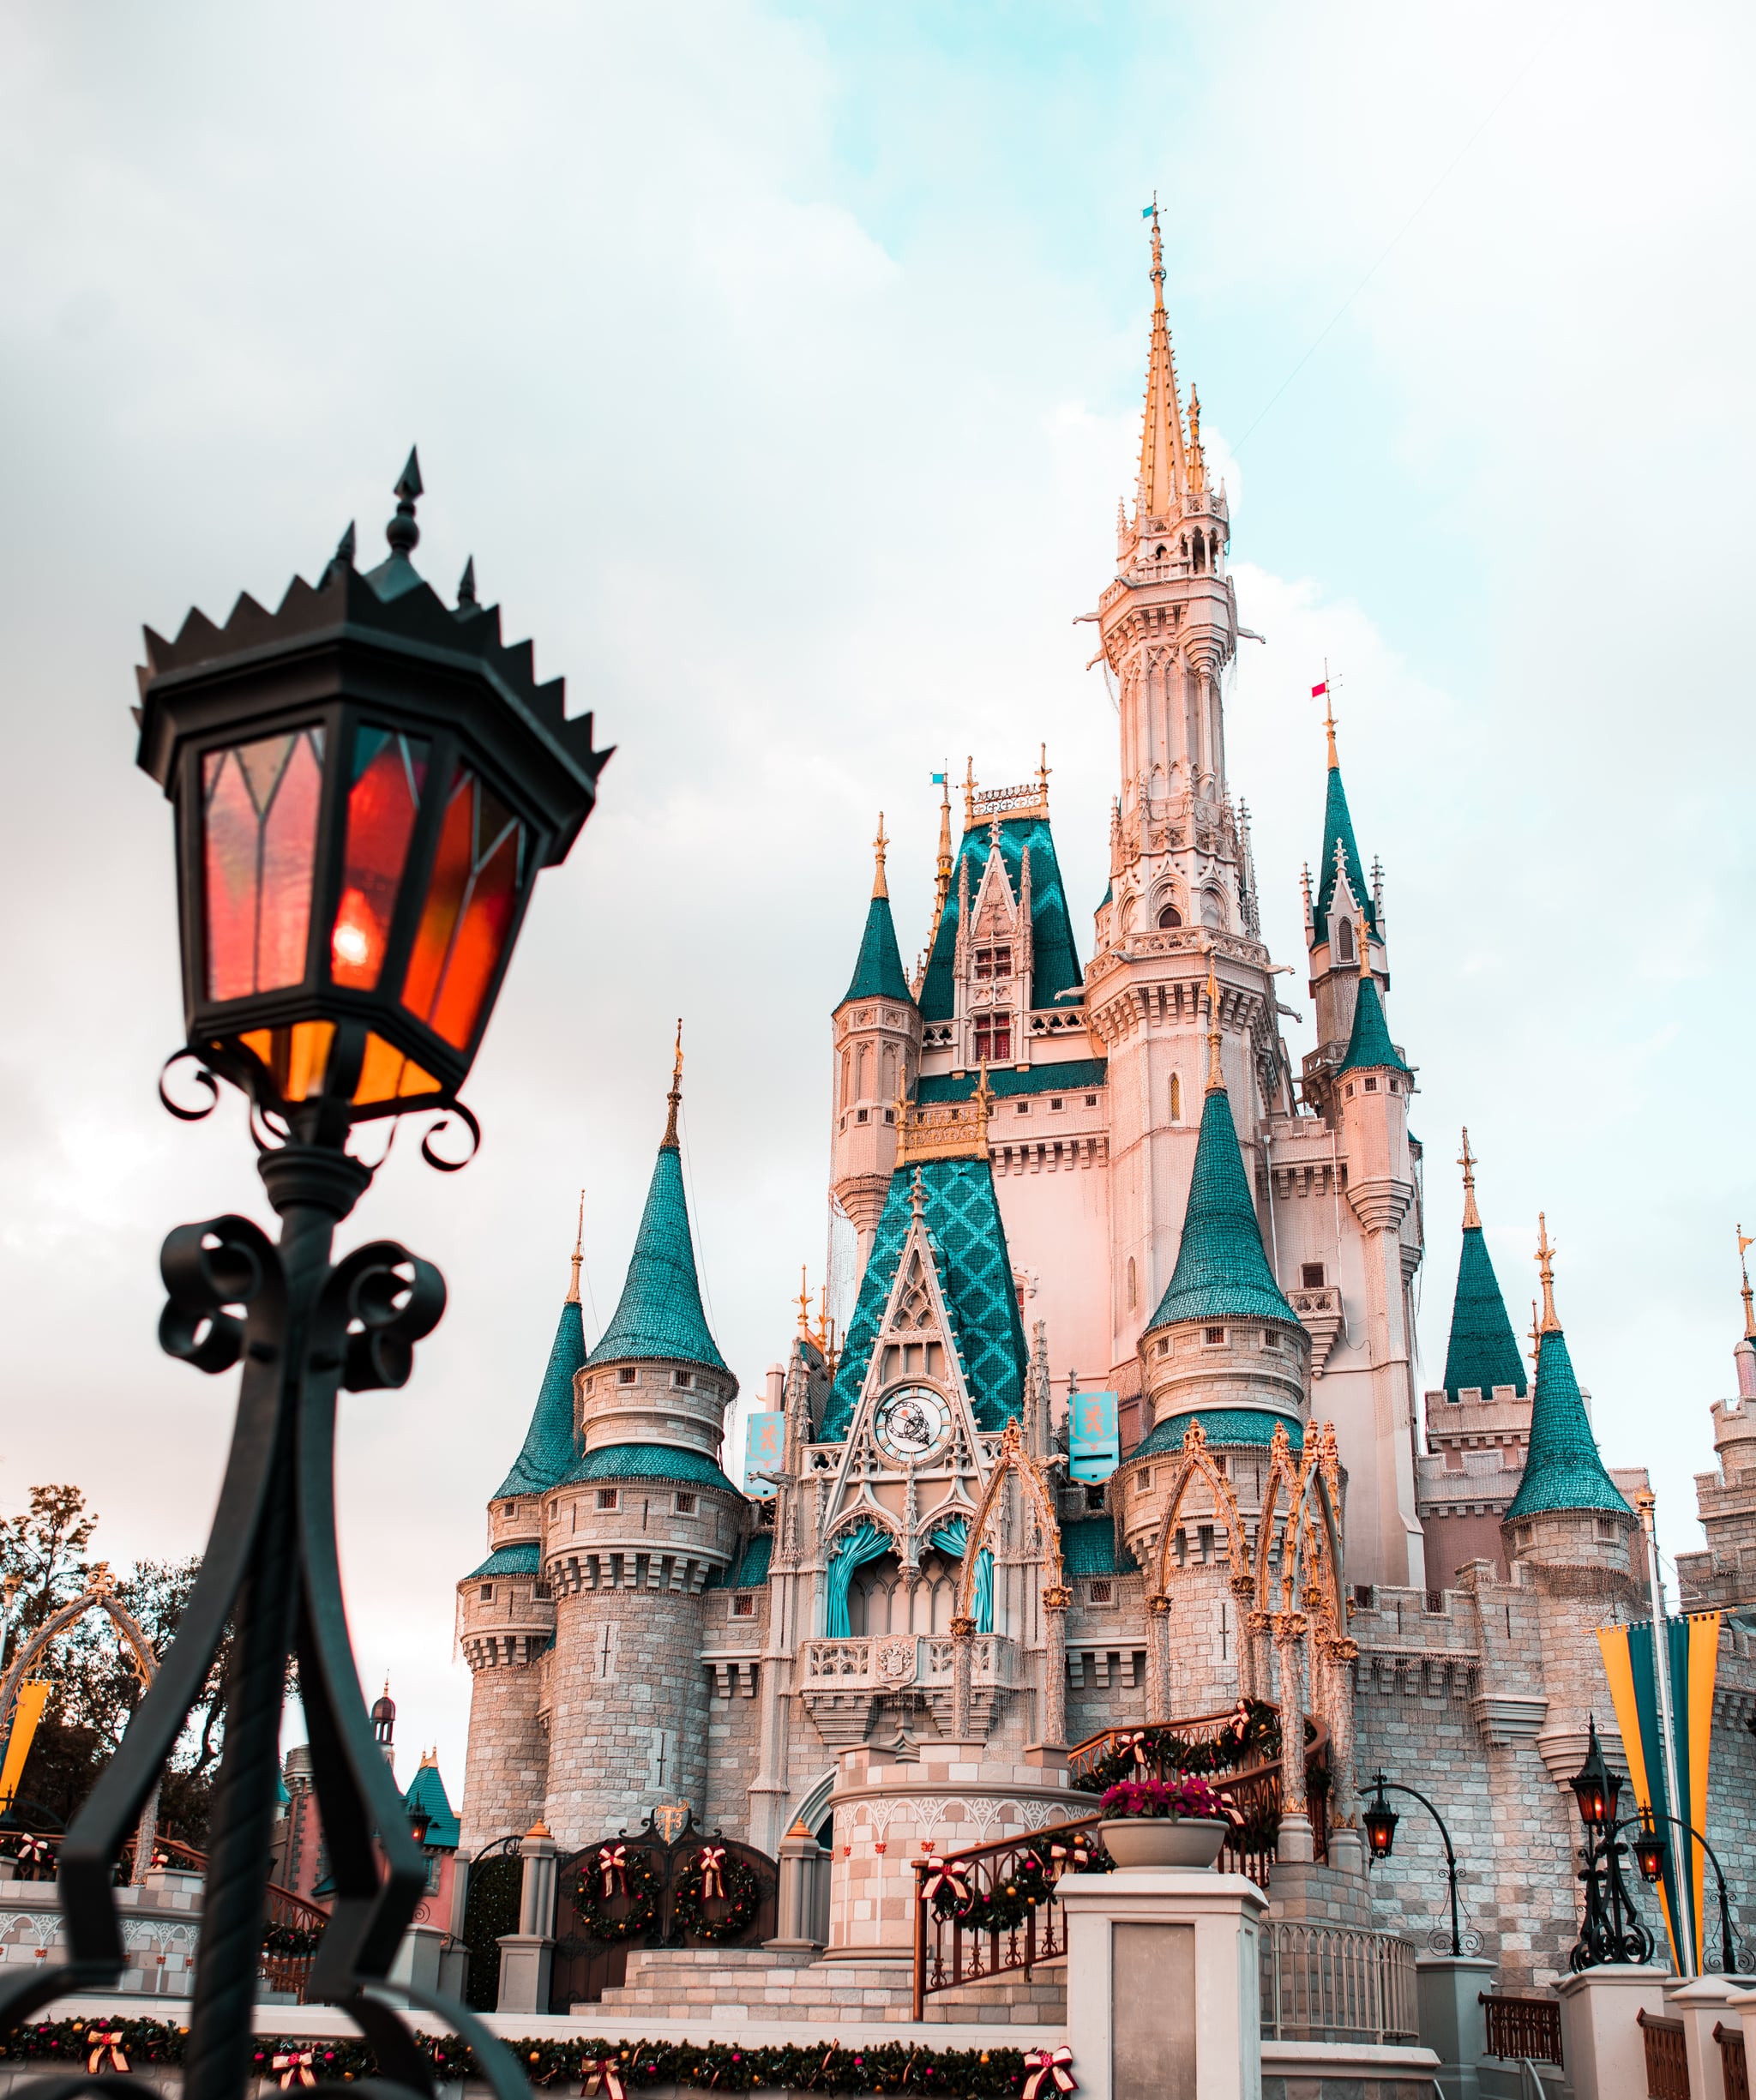 Disney Iphone Wallpaper The Best Wallpaper Ideas That Ll Make Your Phone Look Aesthetically Pleasing Popsugar Tech Photo 4